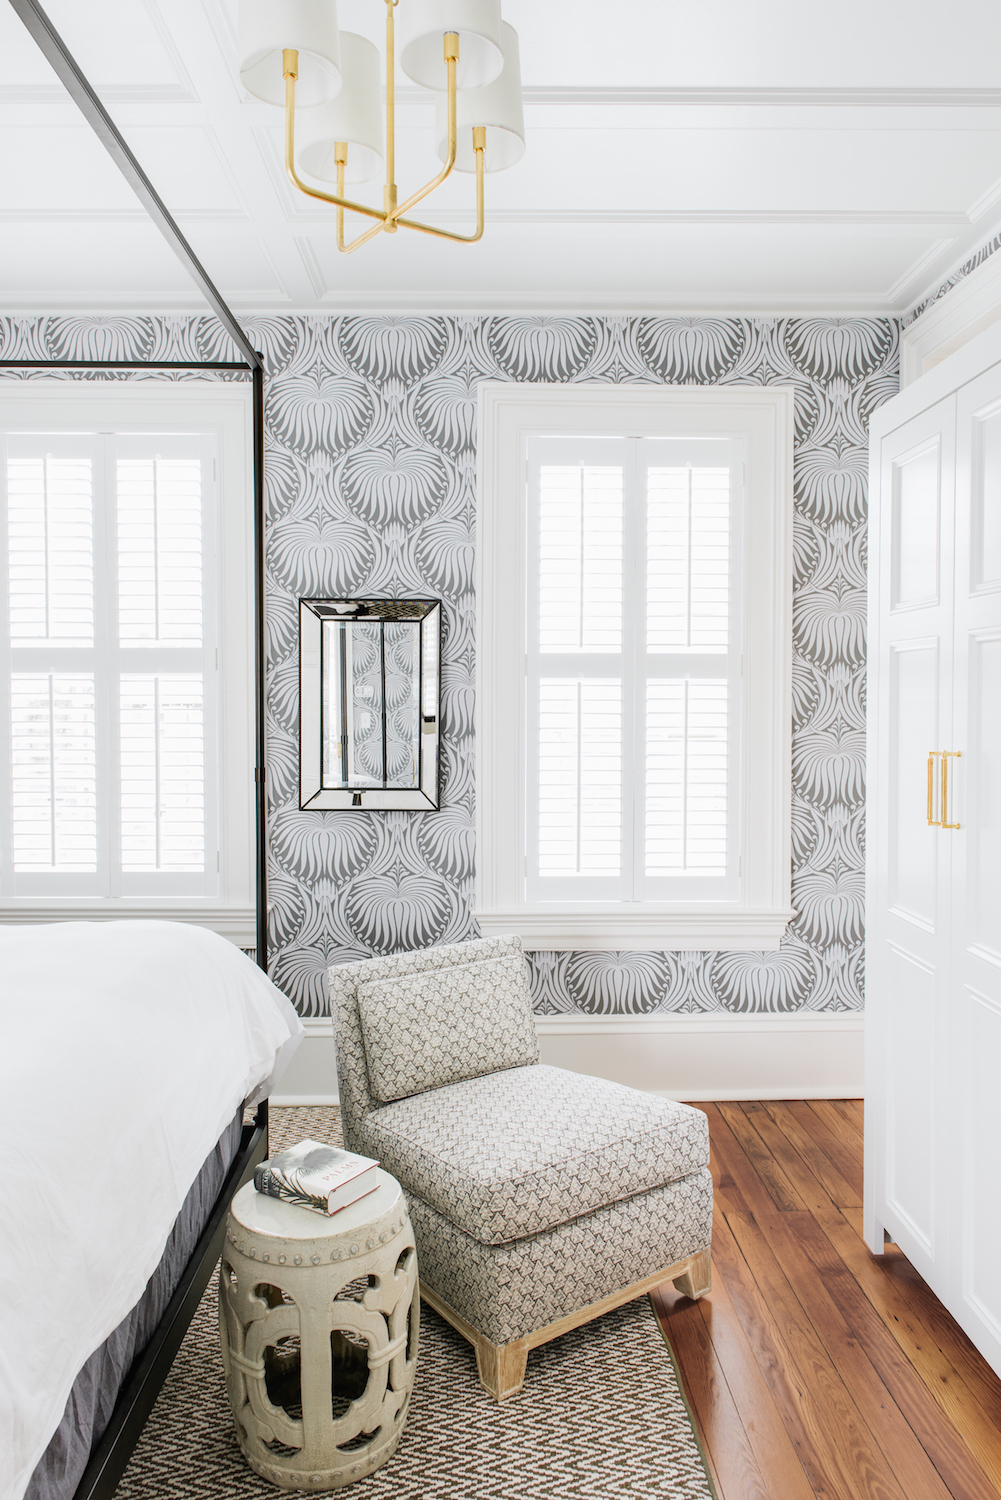 86 Cannon | A Boutique Inn by B. Berry Interiors